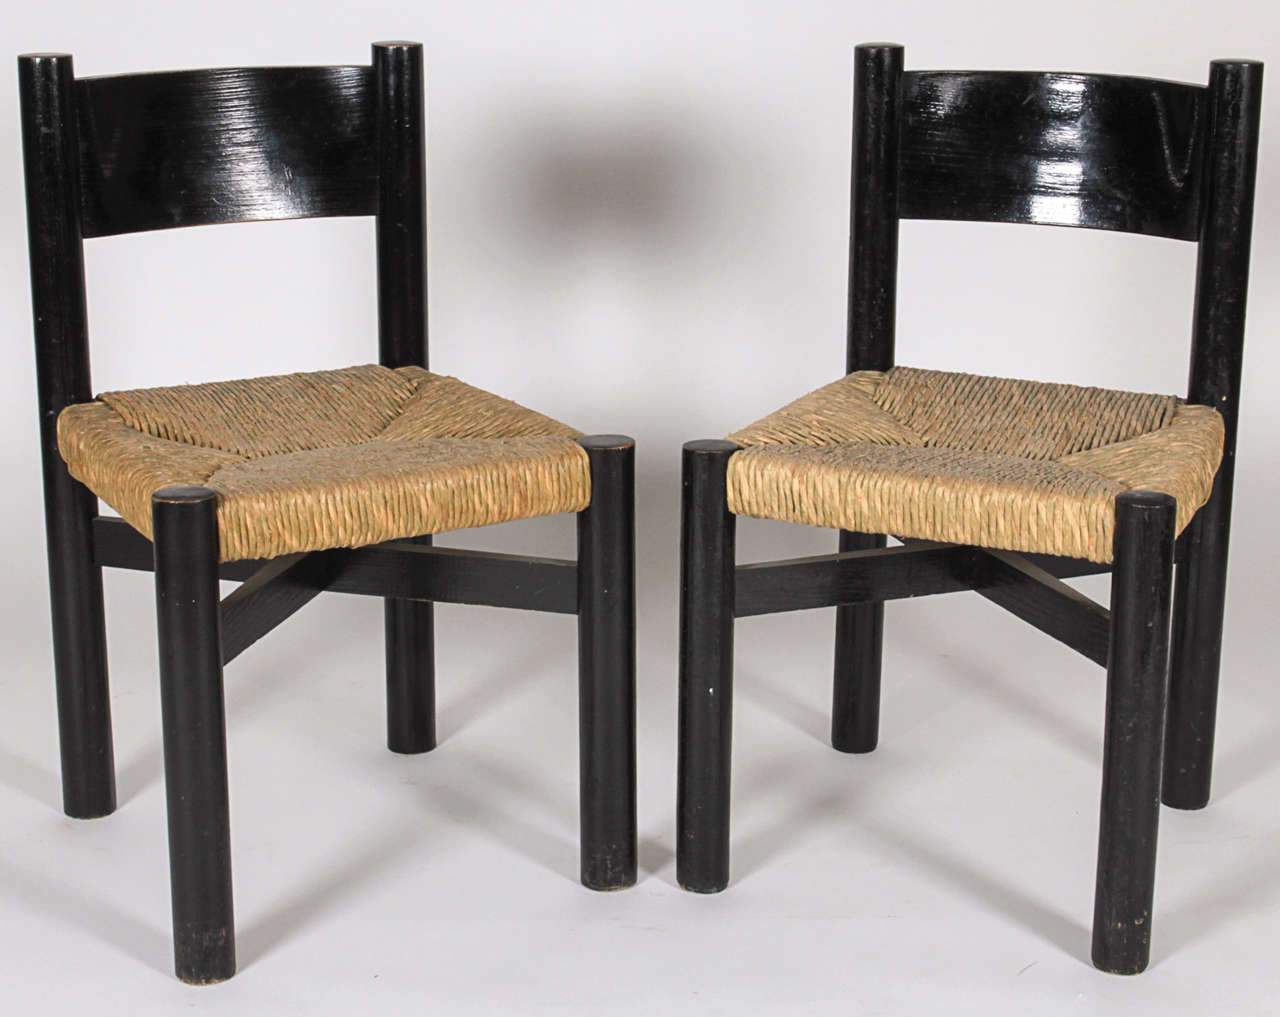 Charlotte Perriand, Circa 1960
Set of six chairs in black painted wood and rush.